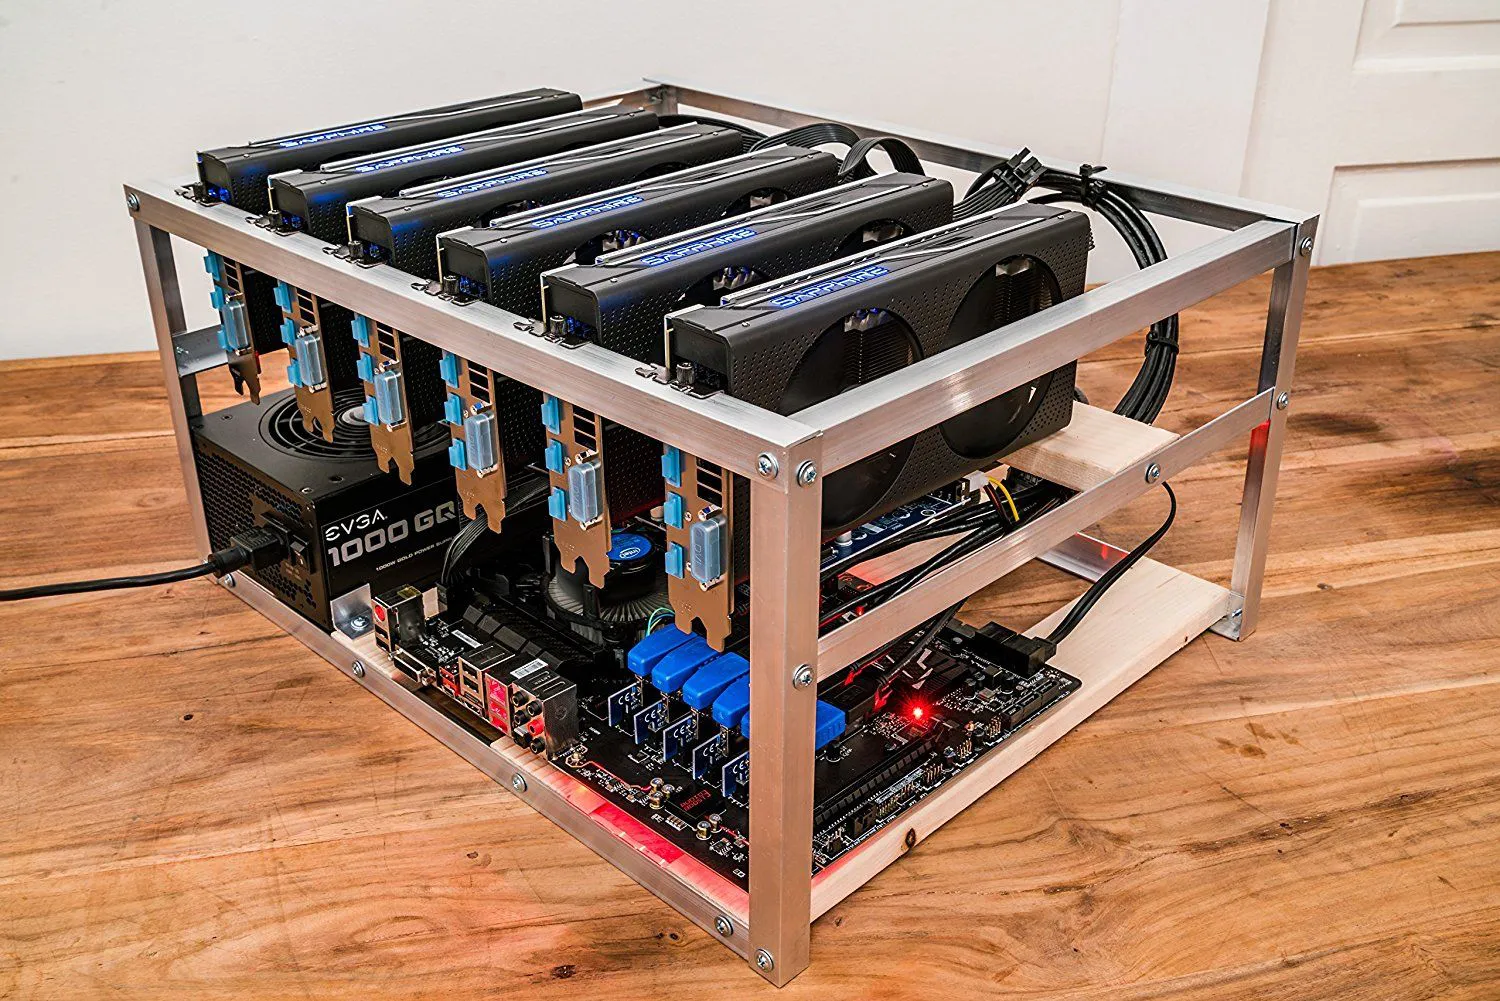 kids made a  simple bitcoin mining rig